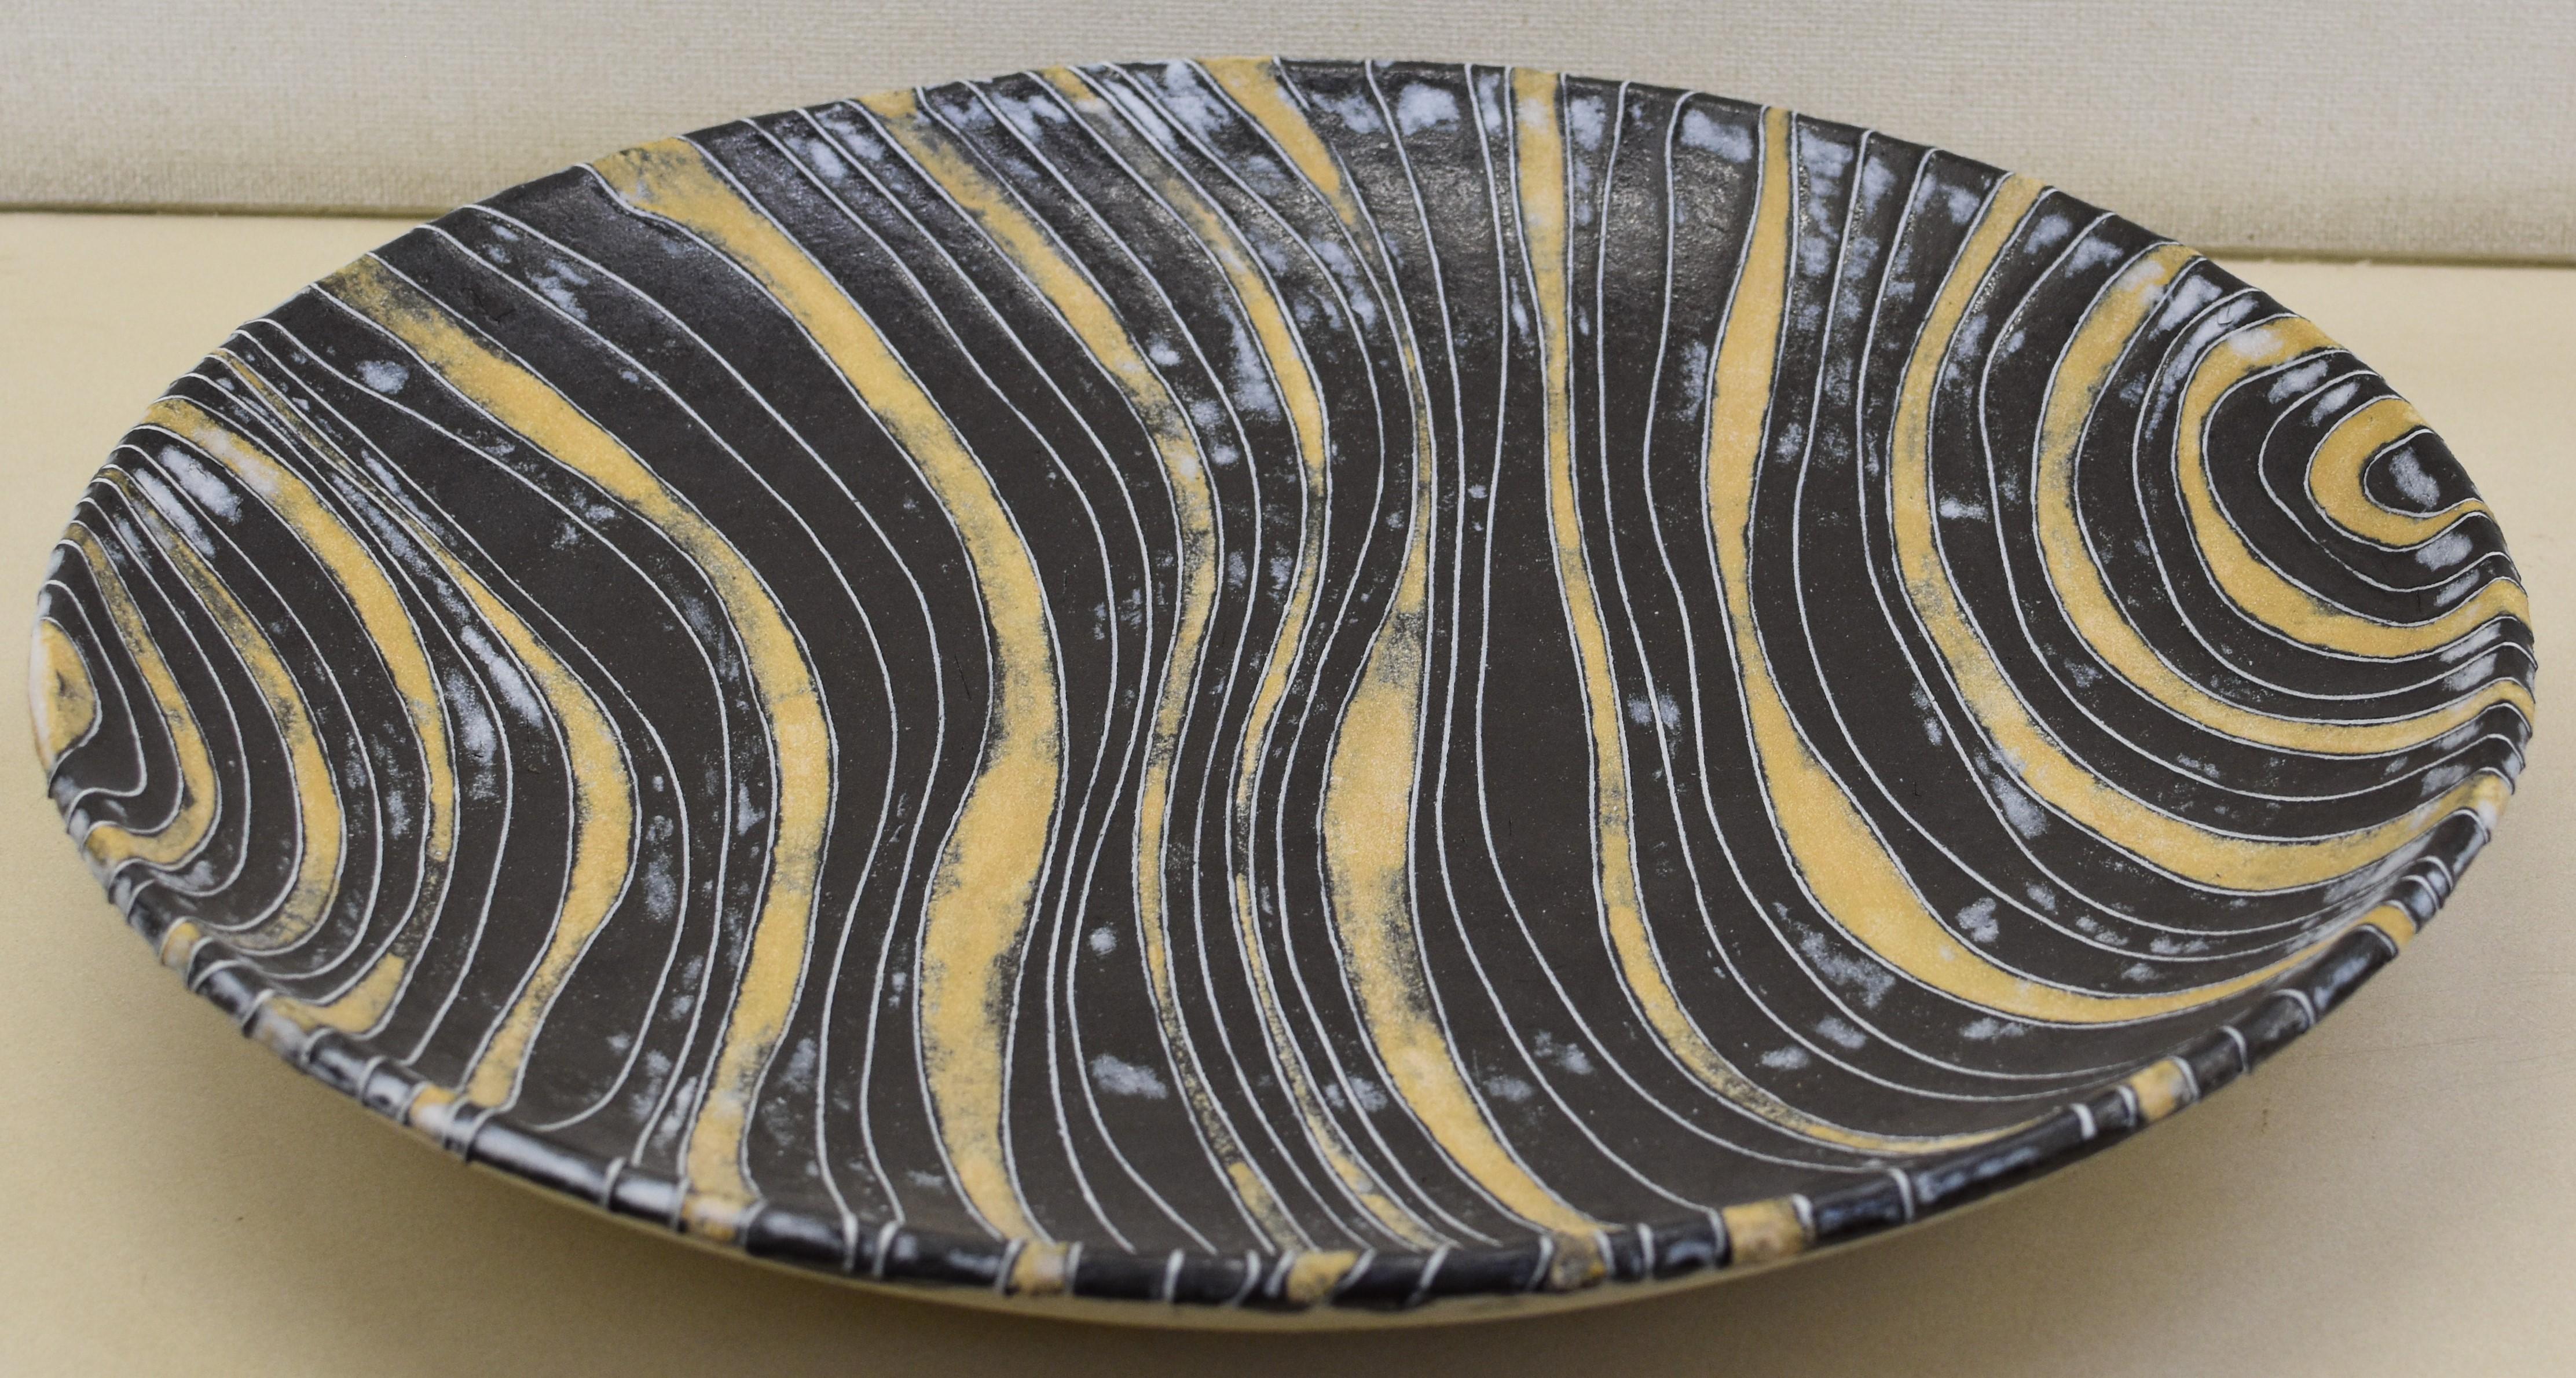 This large unglazed contemporary earthenware deep charger in black and yellow, by a master Japanese ceramic artist employs slip inlay techniques (known as zogan) to create a dynamic canvas of flowing color and movement. Located on the foothills of